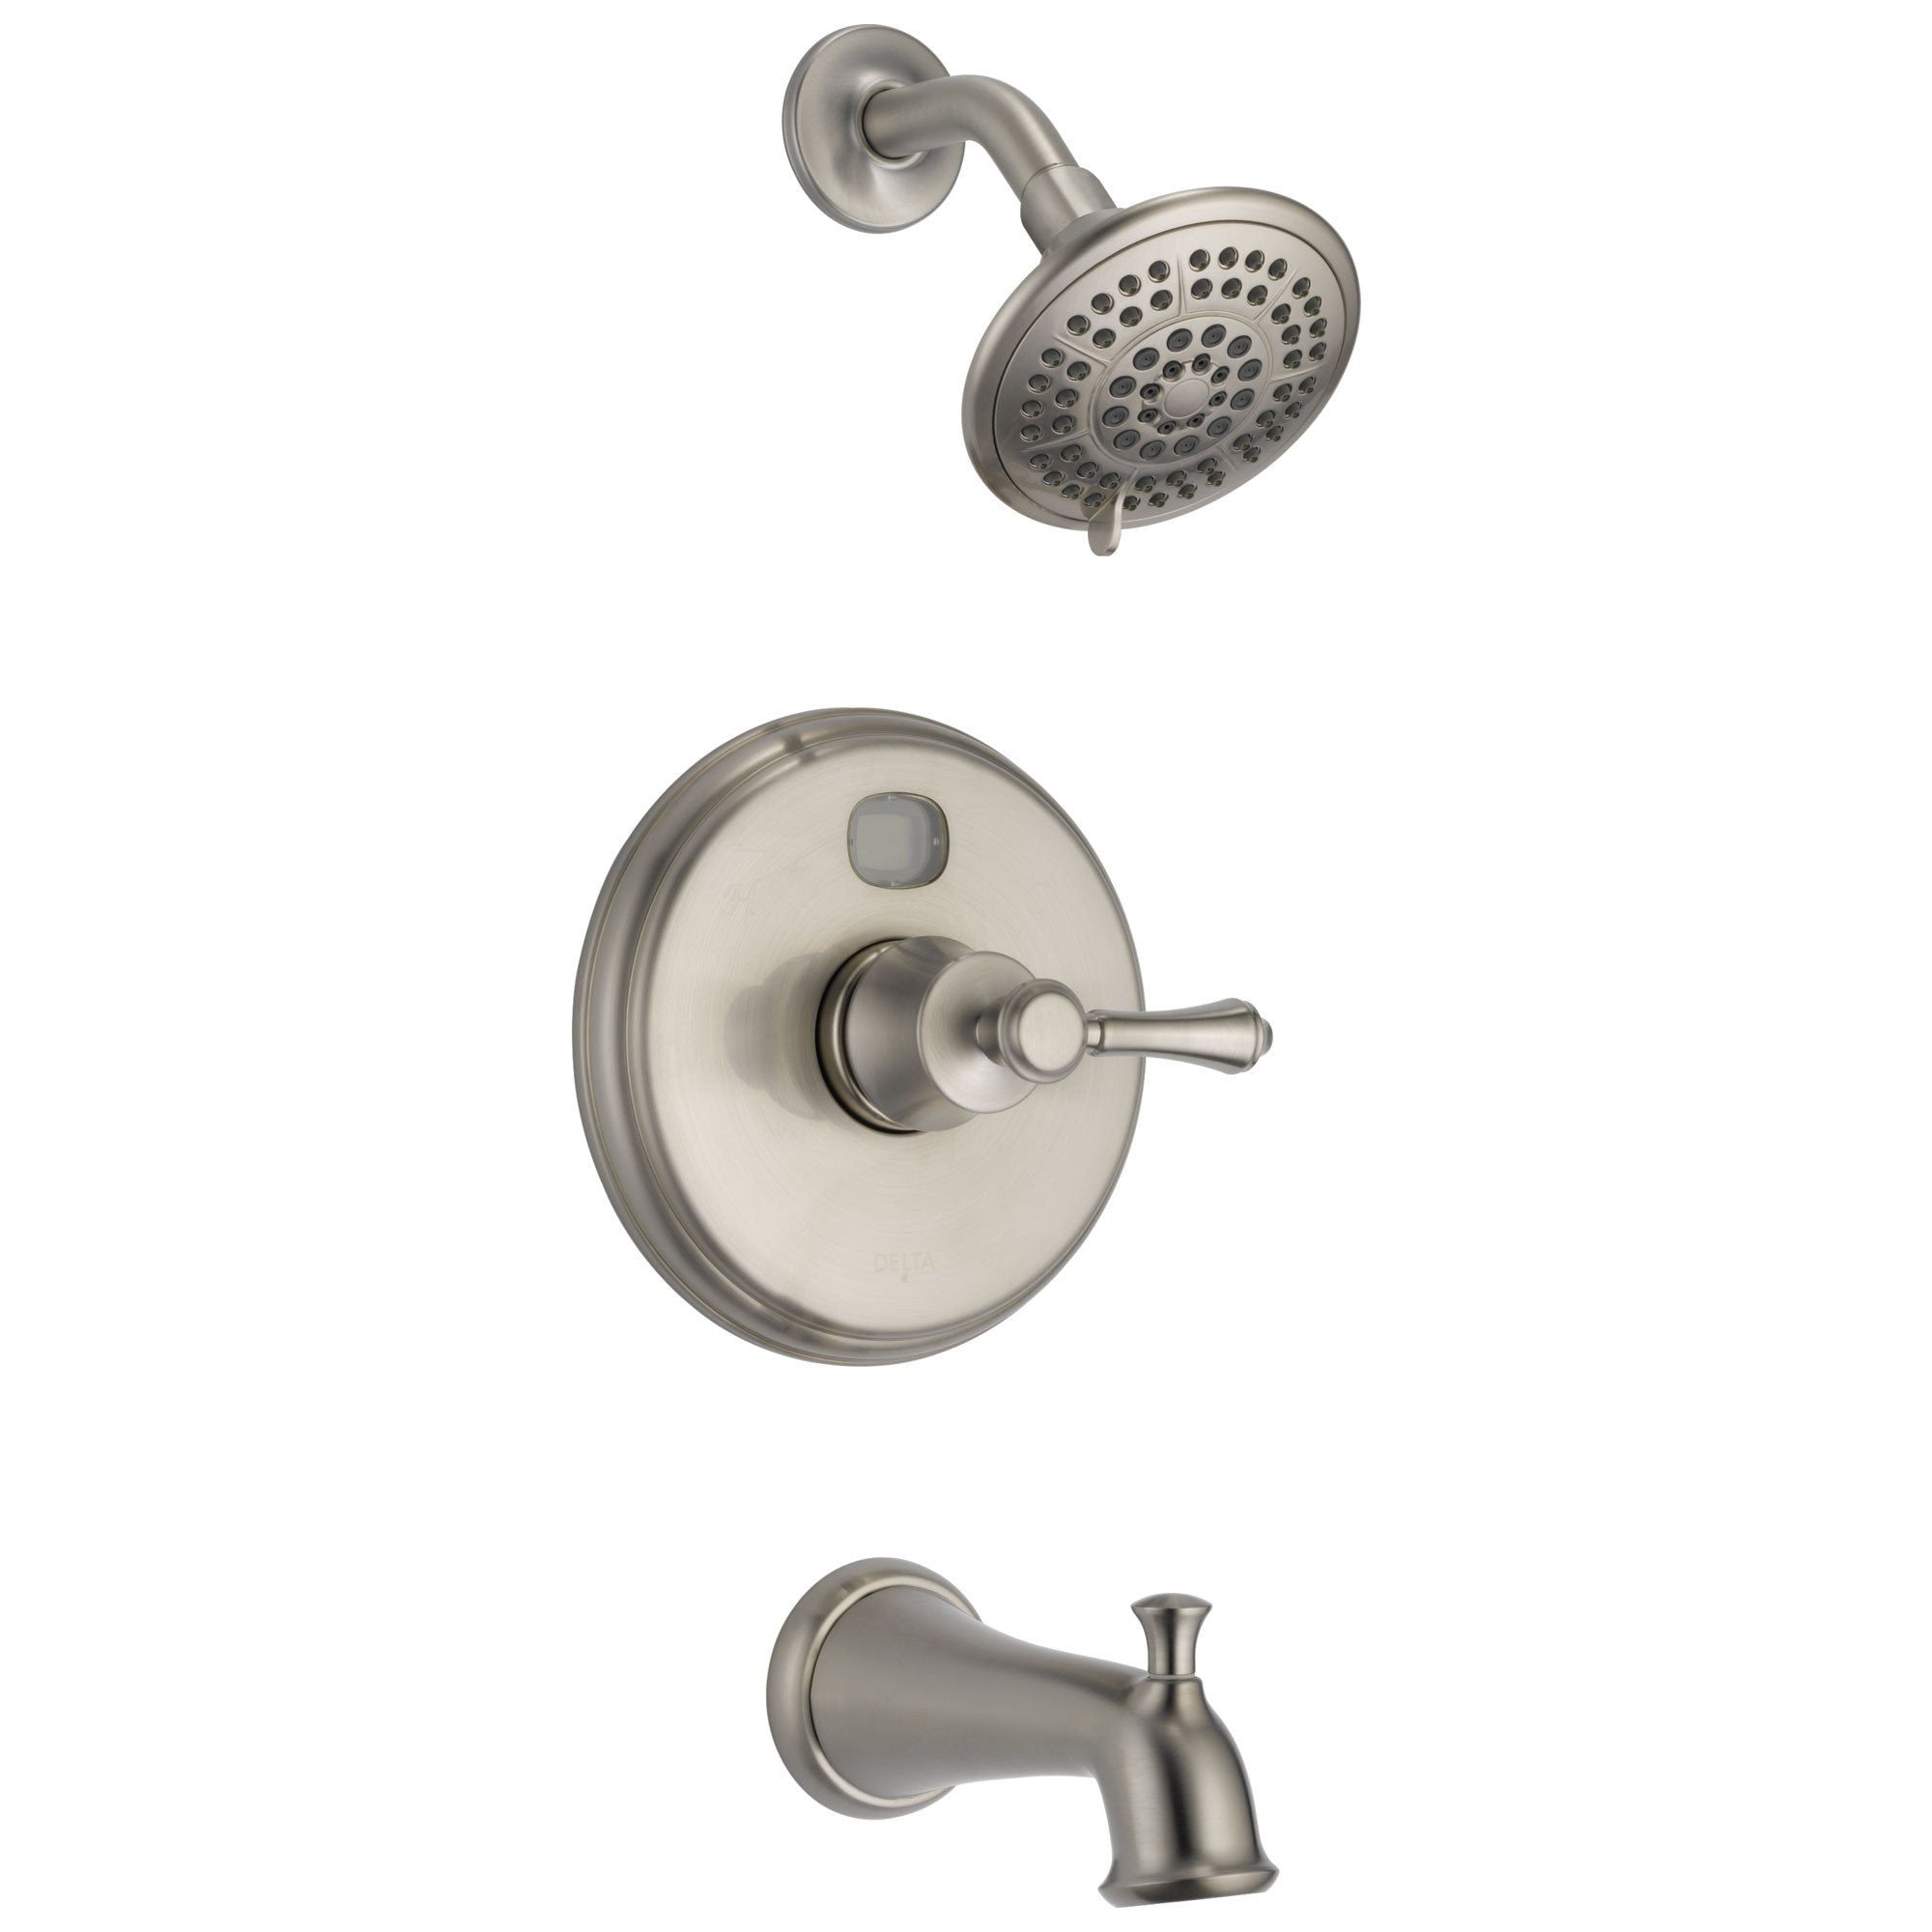 Delta Stainless Steel Finish MultiChoice 14 Series Temp2O Digital One Handle Tub and Shower Combination Faucet Complete item: Trim Kit and Rough-in Valve Included 650930